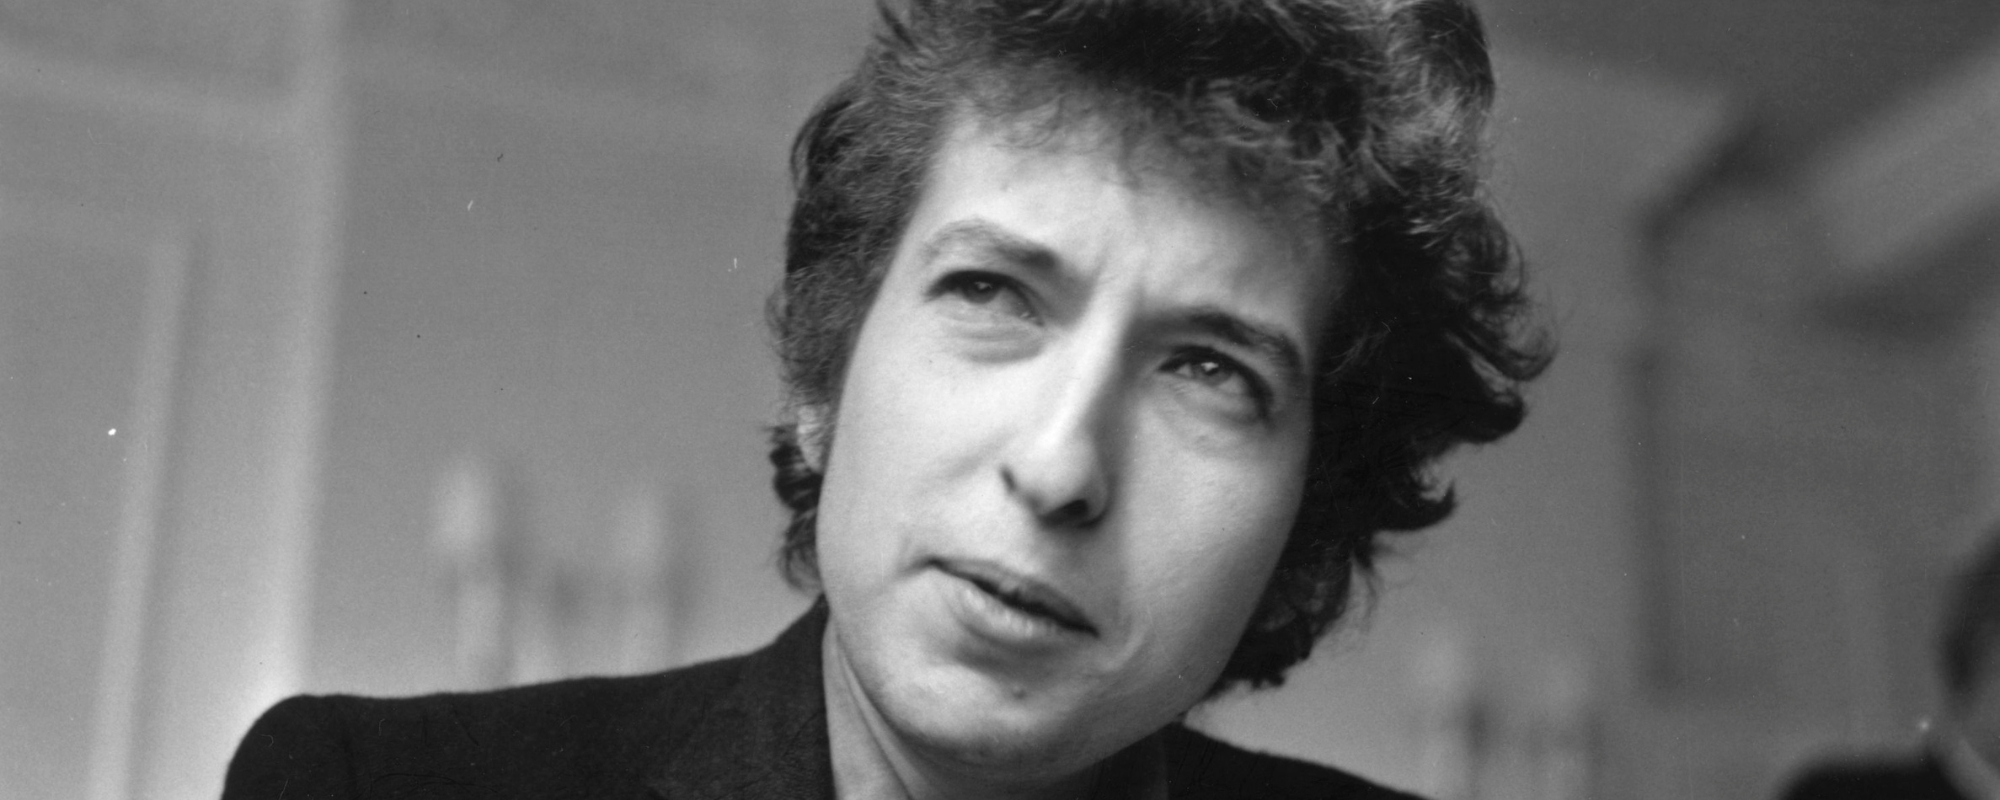 The Star-Crossed Love Affair of Bob Dylan and Joan Baez and How It Inspired “Diamonds and Rust”